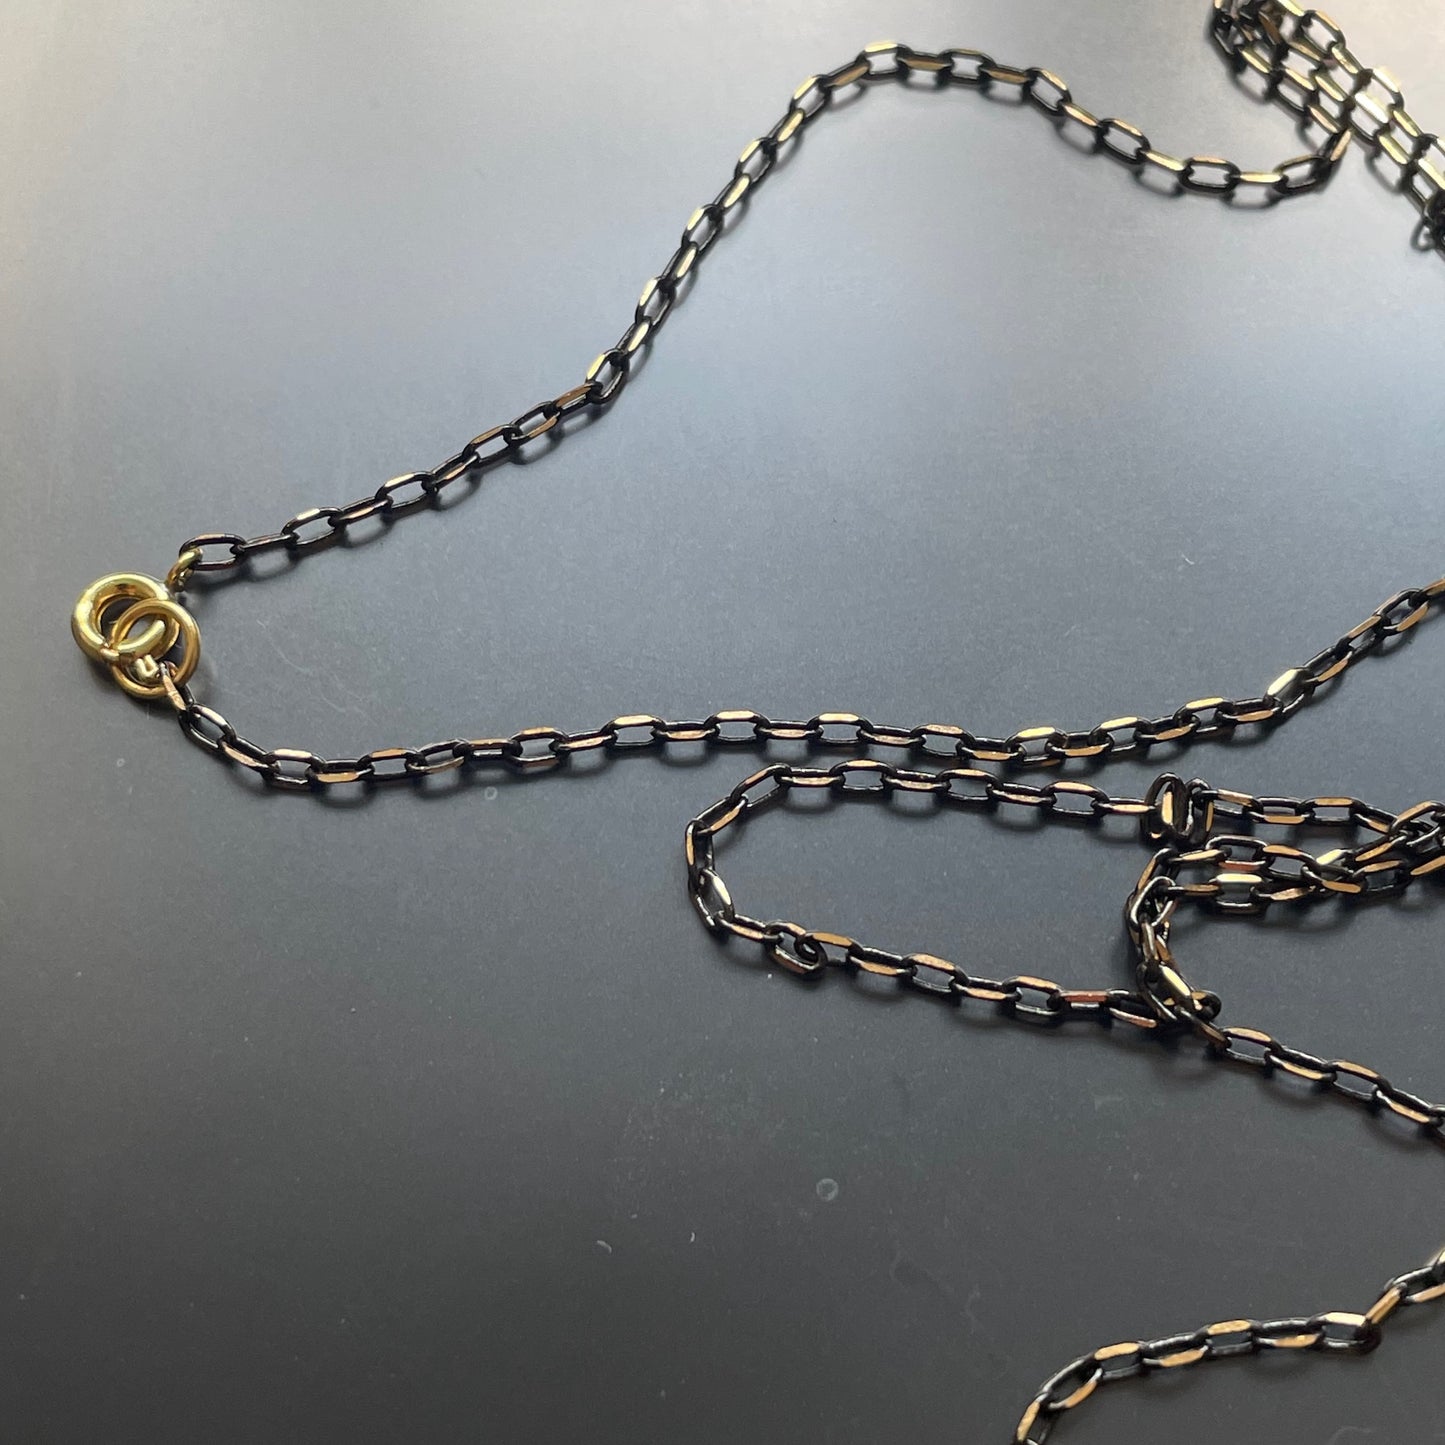 Oxidised Sparkled Brass Necklace with Semi-circle Pendant